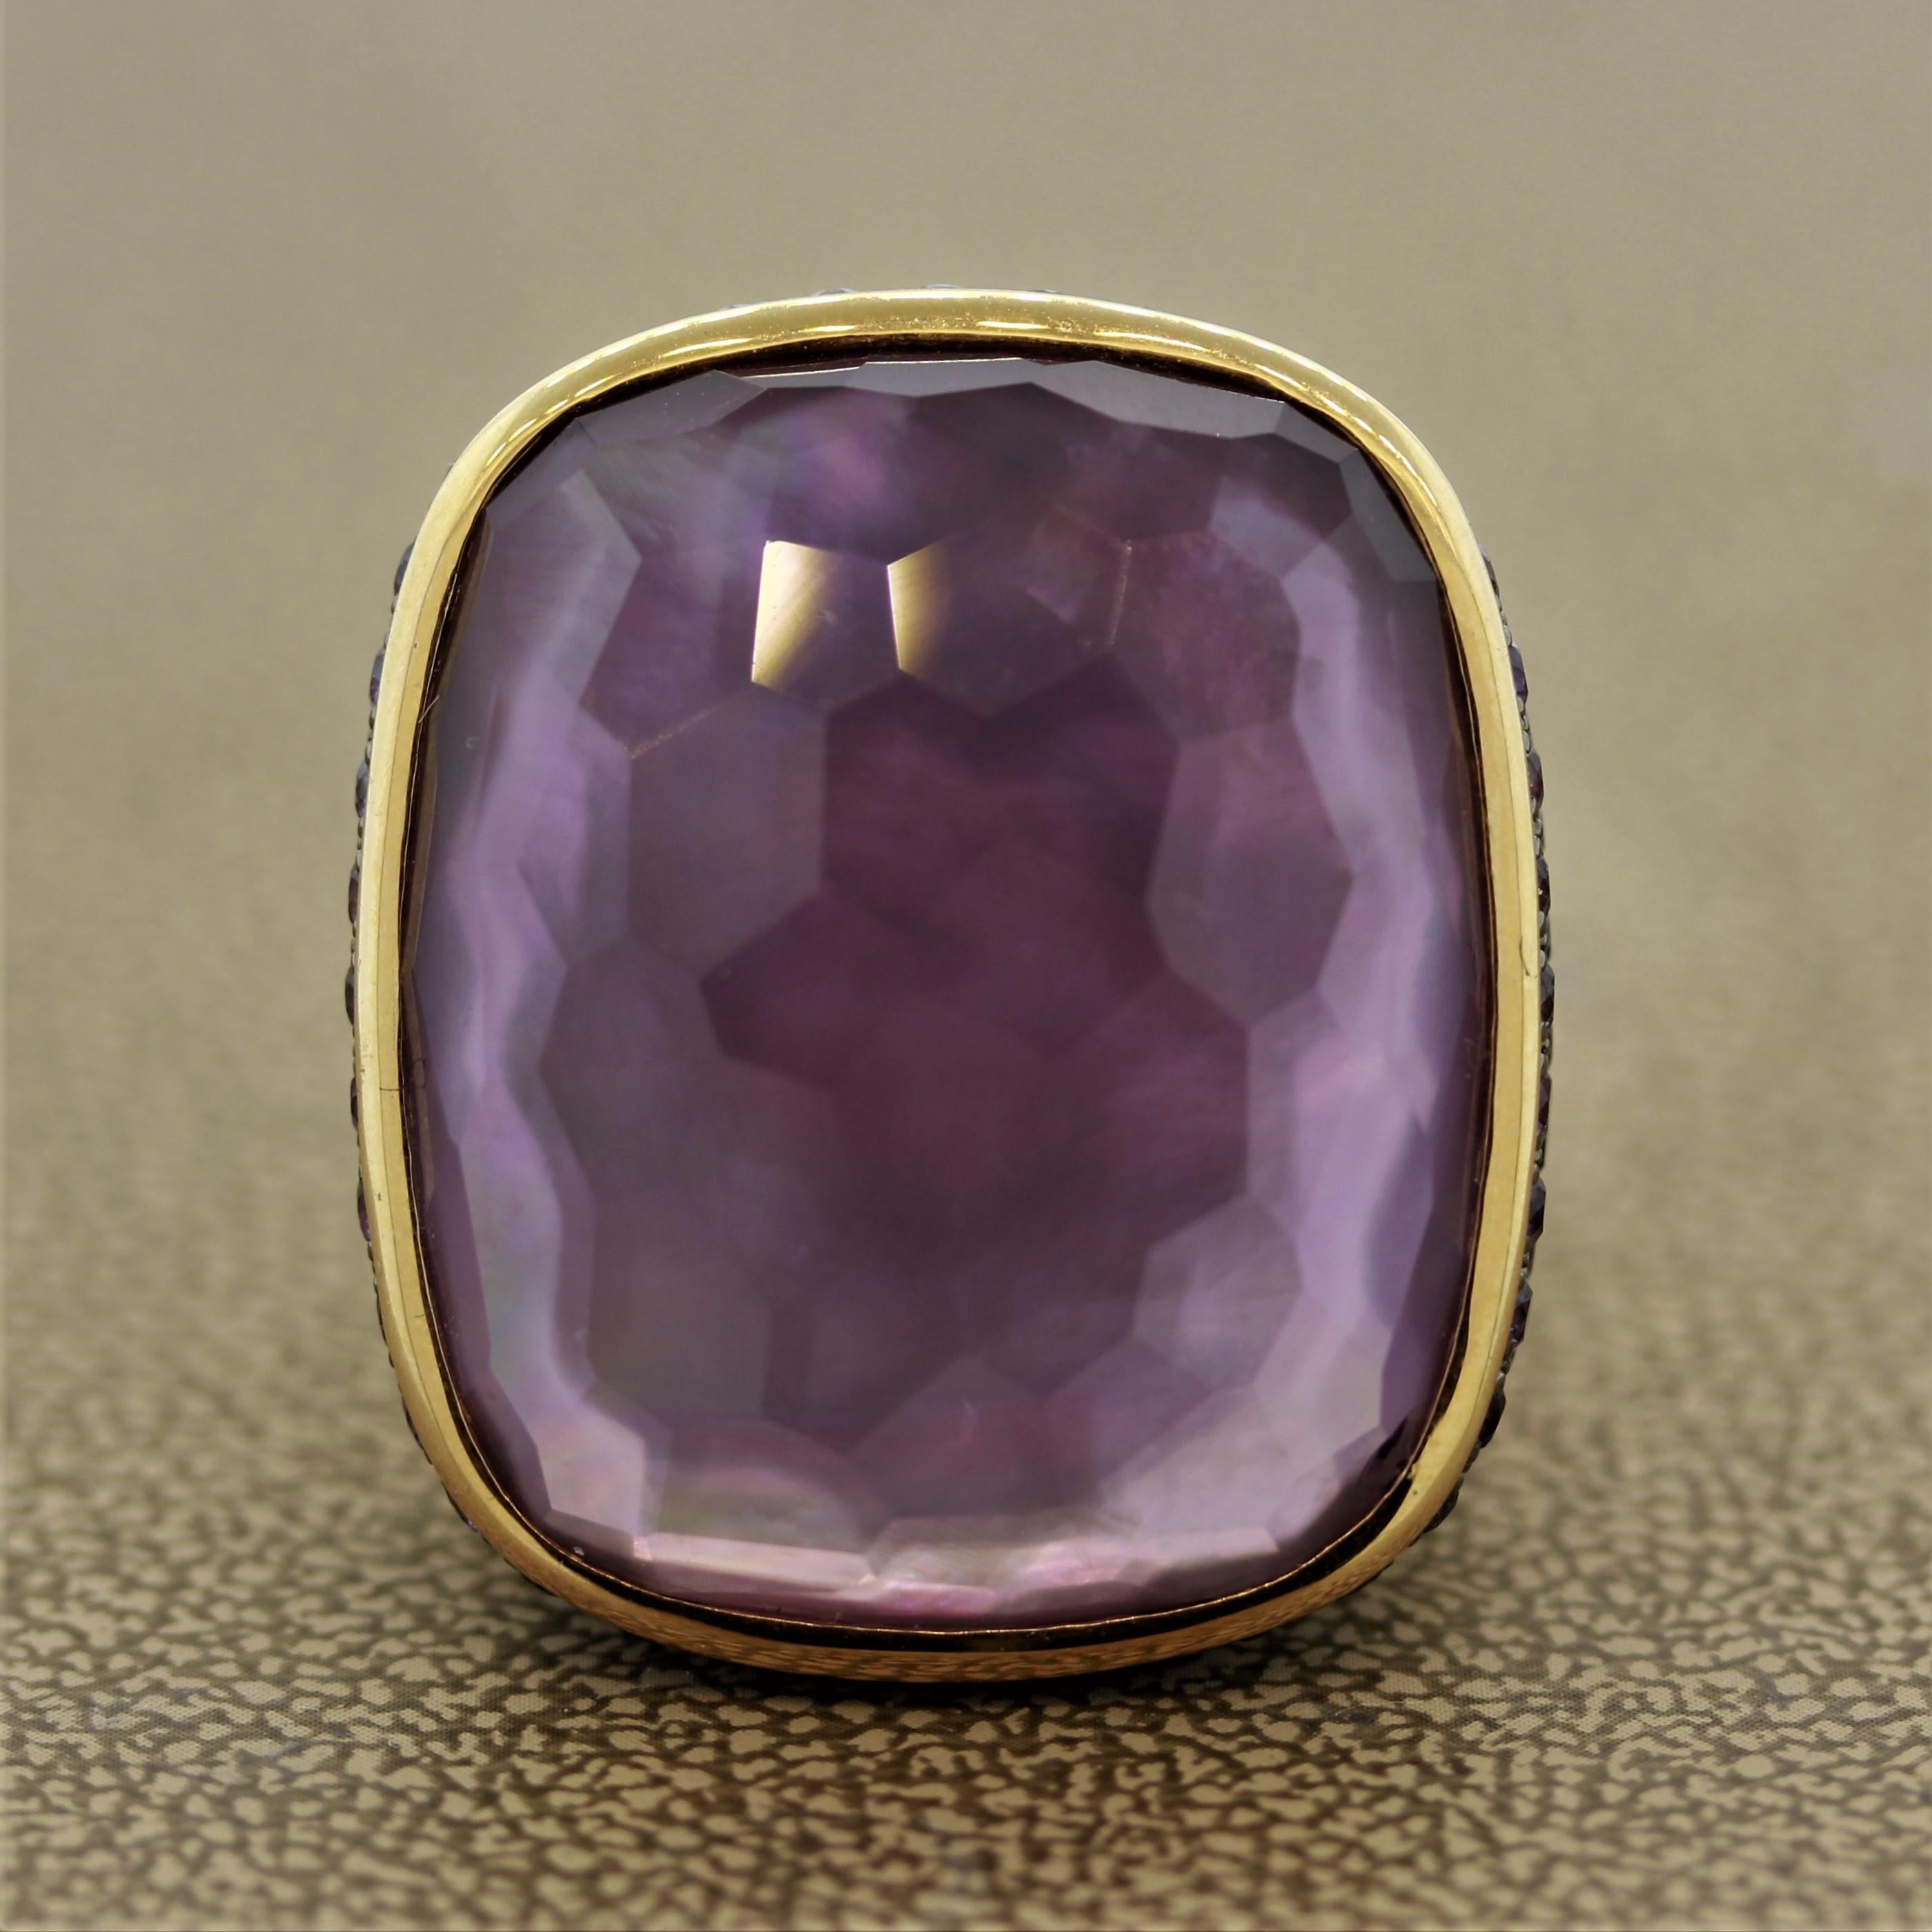 A unique ring featuring a 22.04 carat amethyst set directly over a flat piece of mother of pearl. The bright natural flashes of color from the mother of pearl can be seen from the amethyst giving it a unique look. The sides of the ring are set with